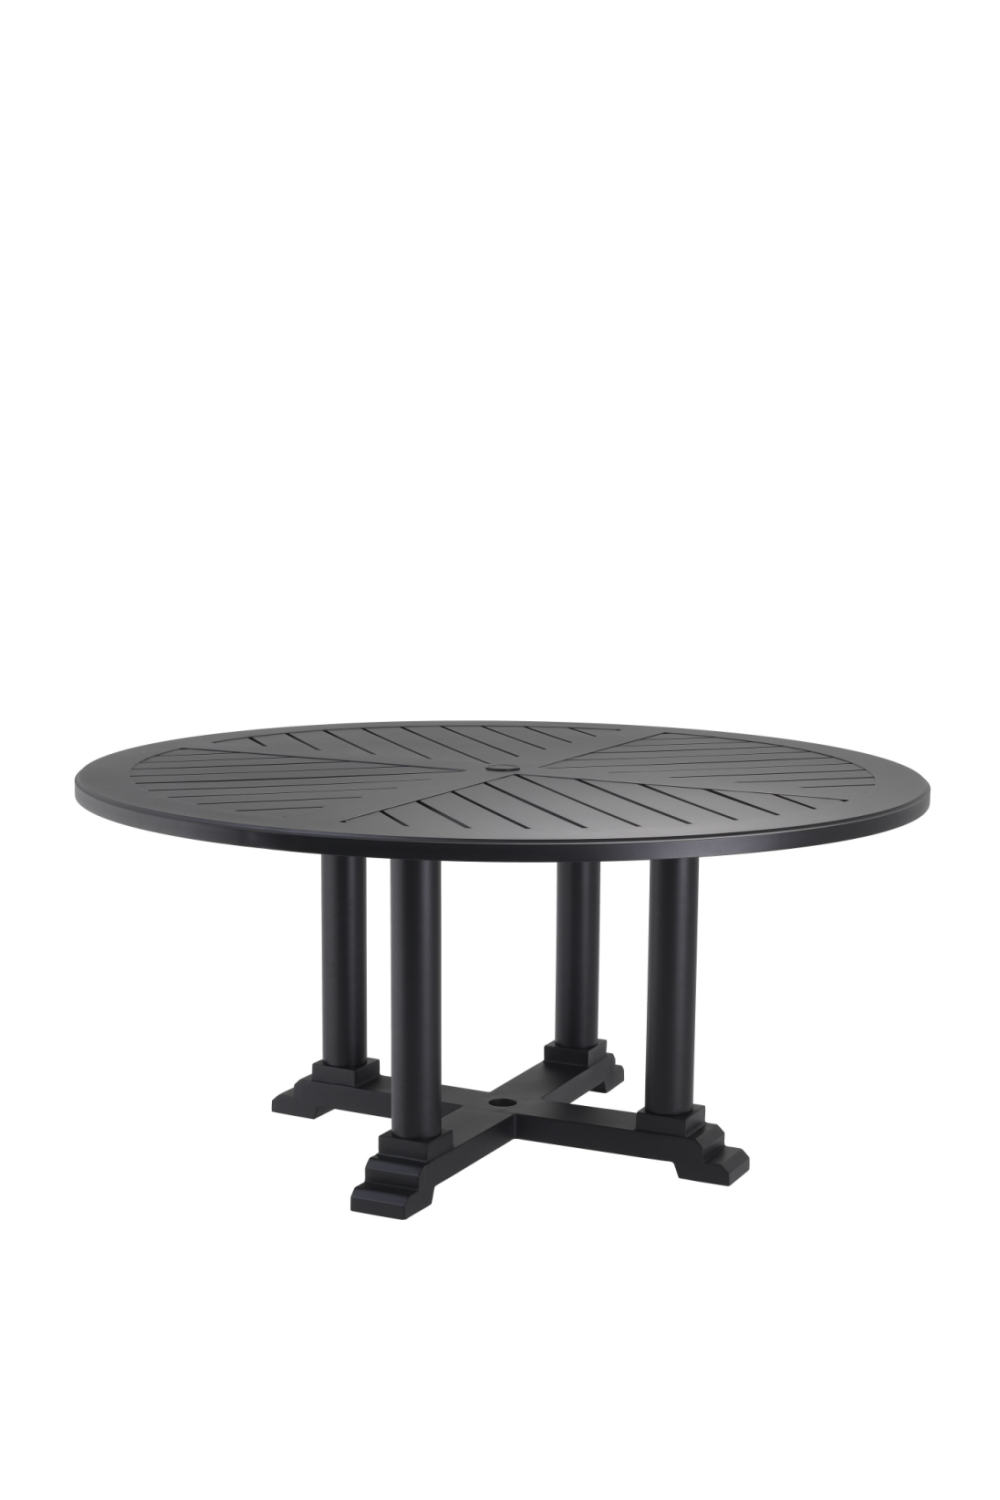 Black Round Outdoor Dining Table | Eichholtz Bell Rive | Oroatrade.com